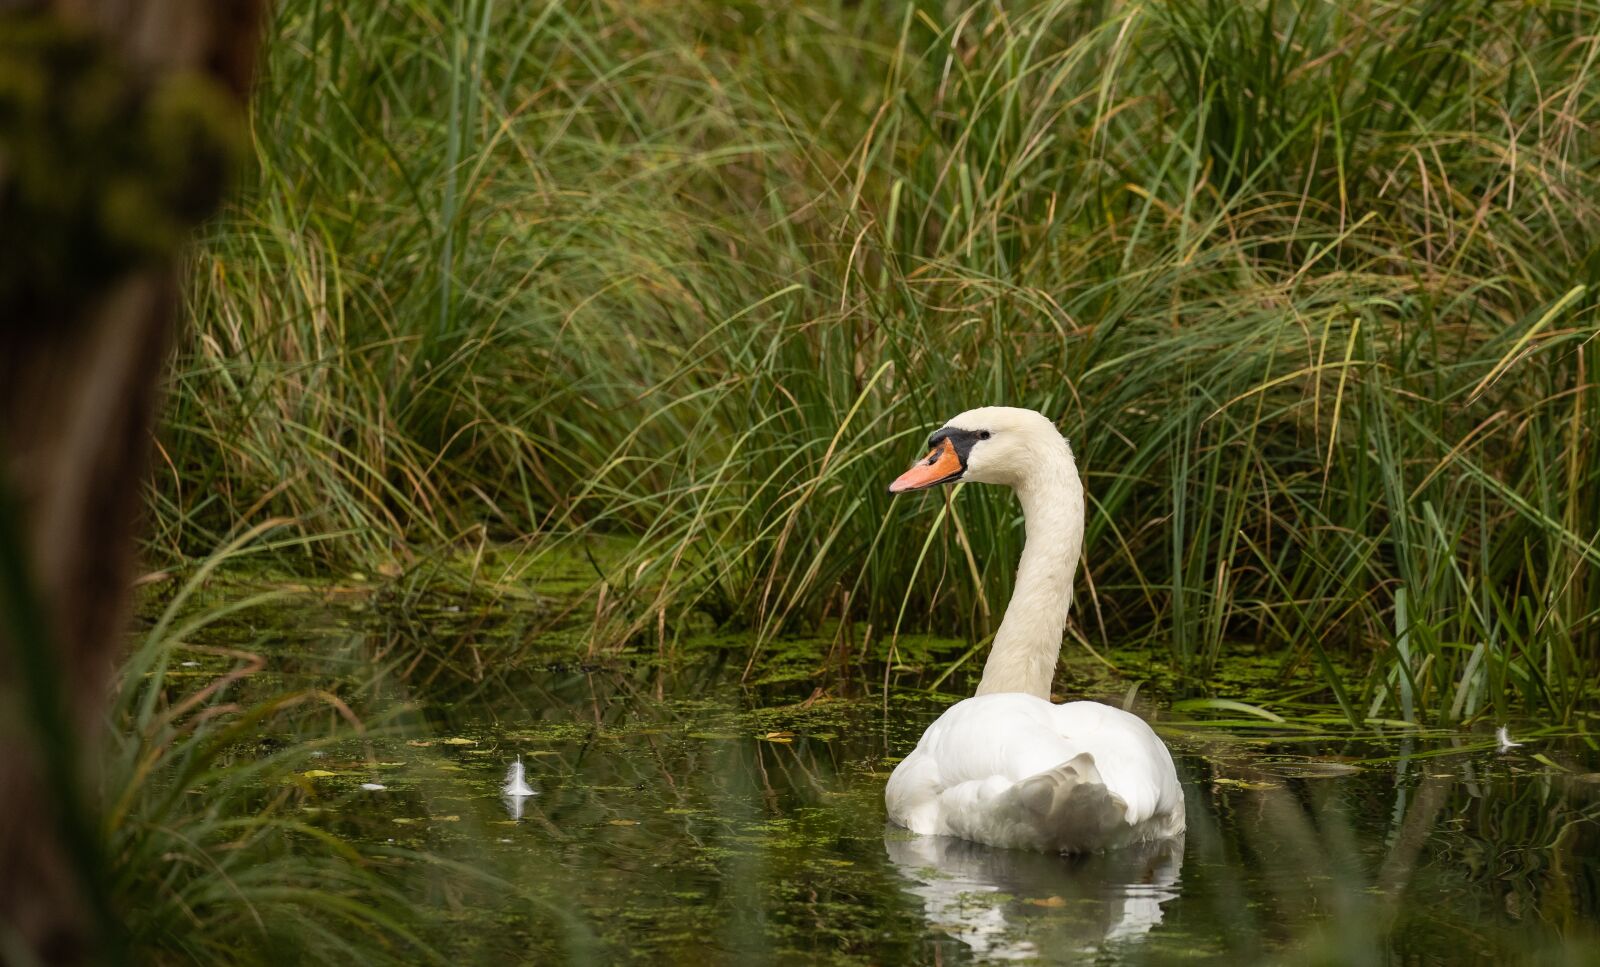 Canon EOS R6 sample photo. "Swan, swamp, nature" photography